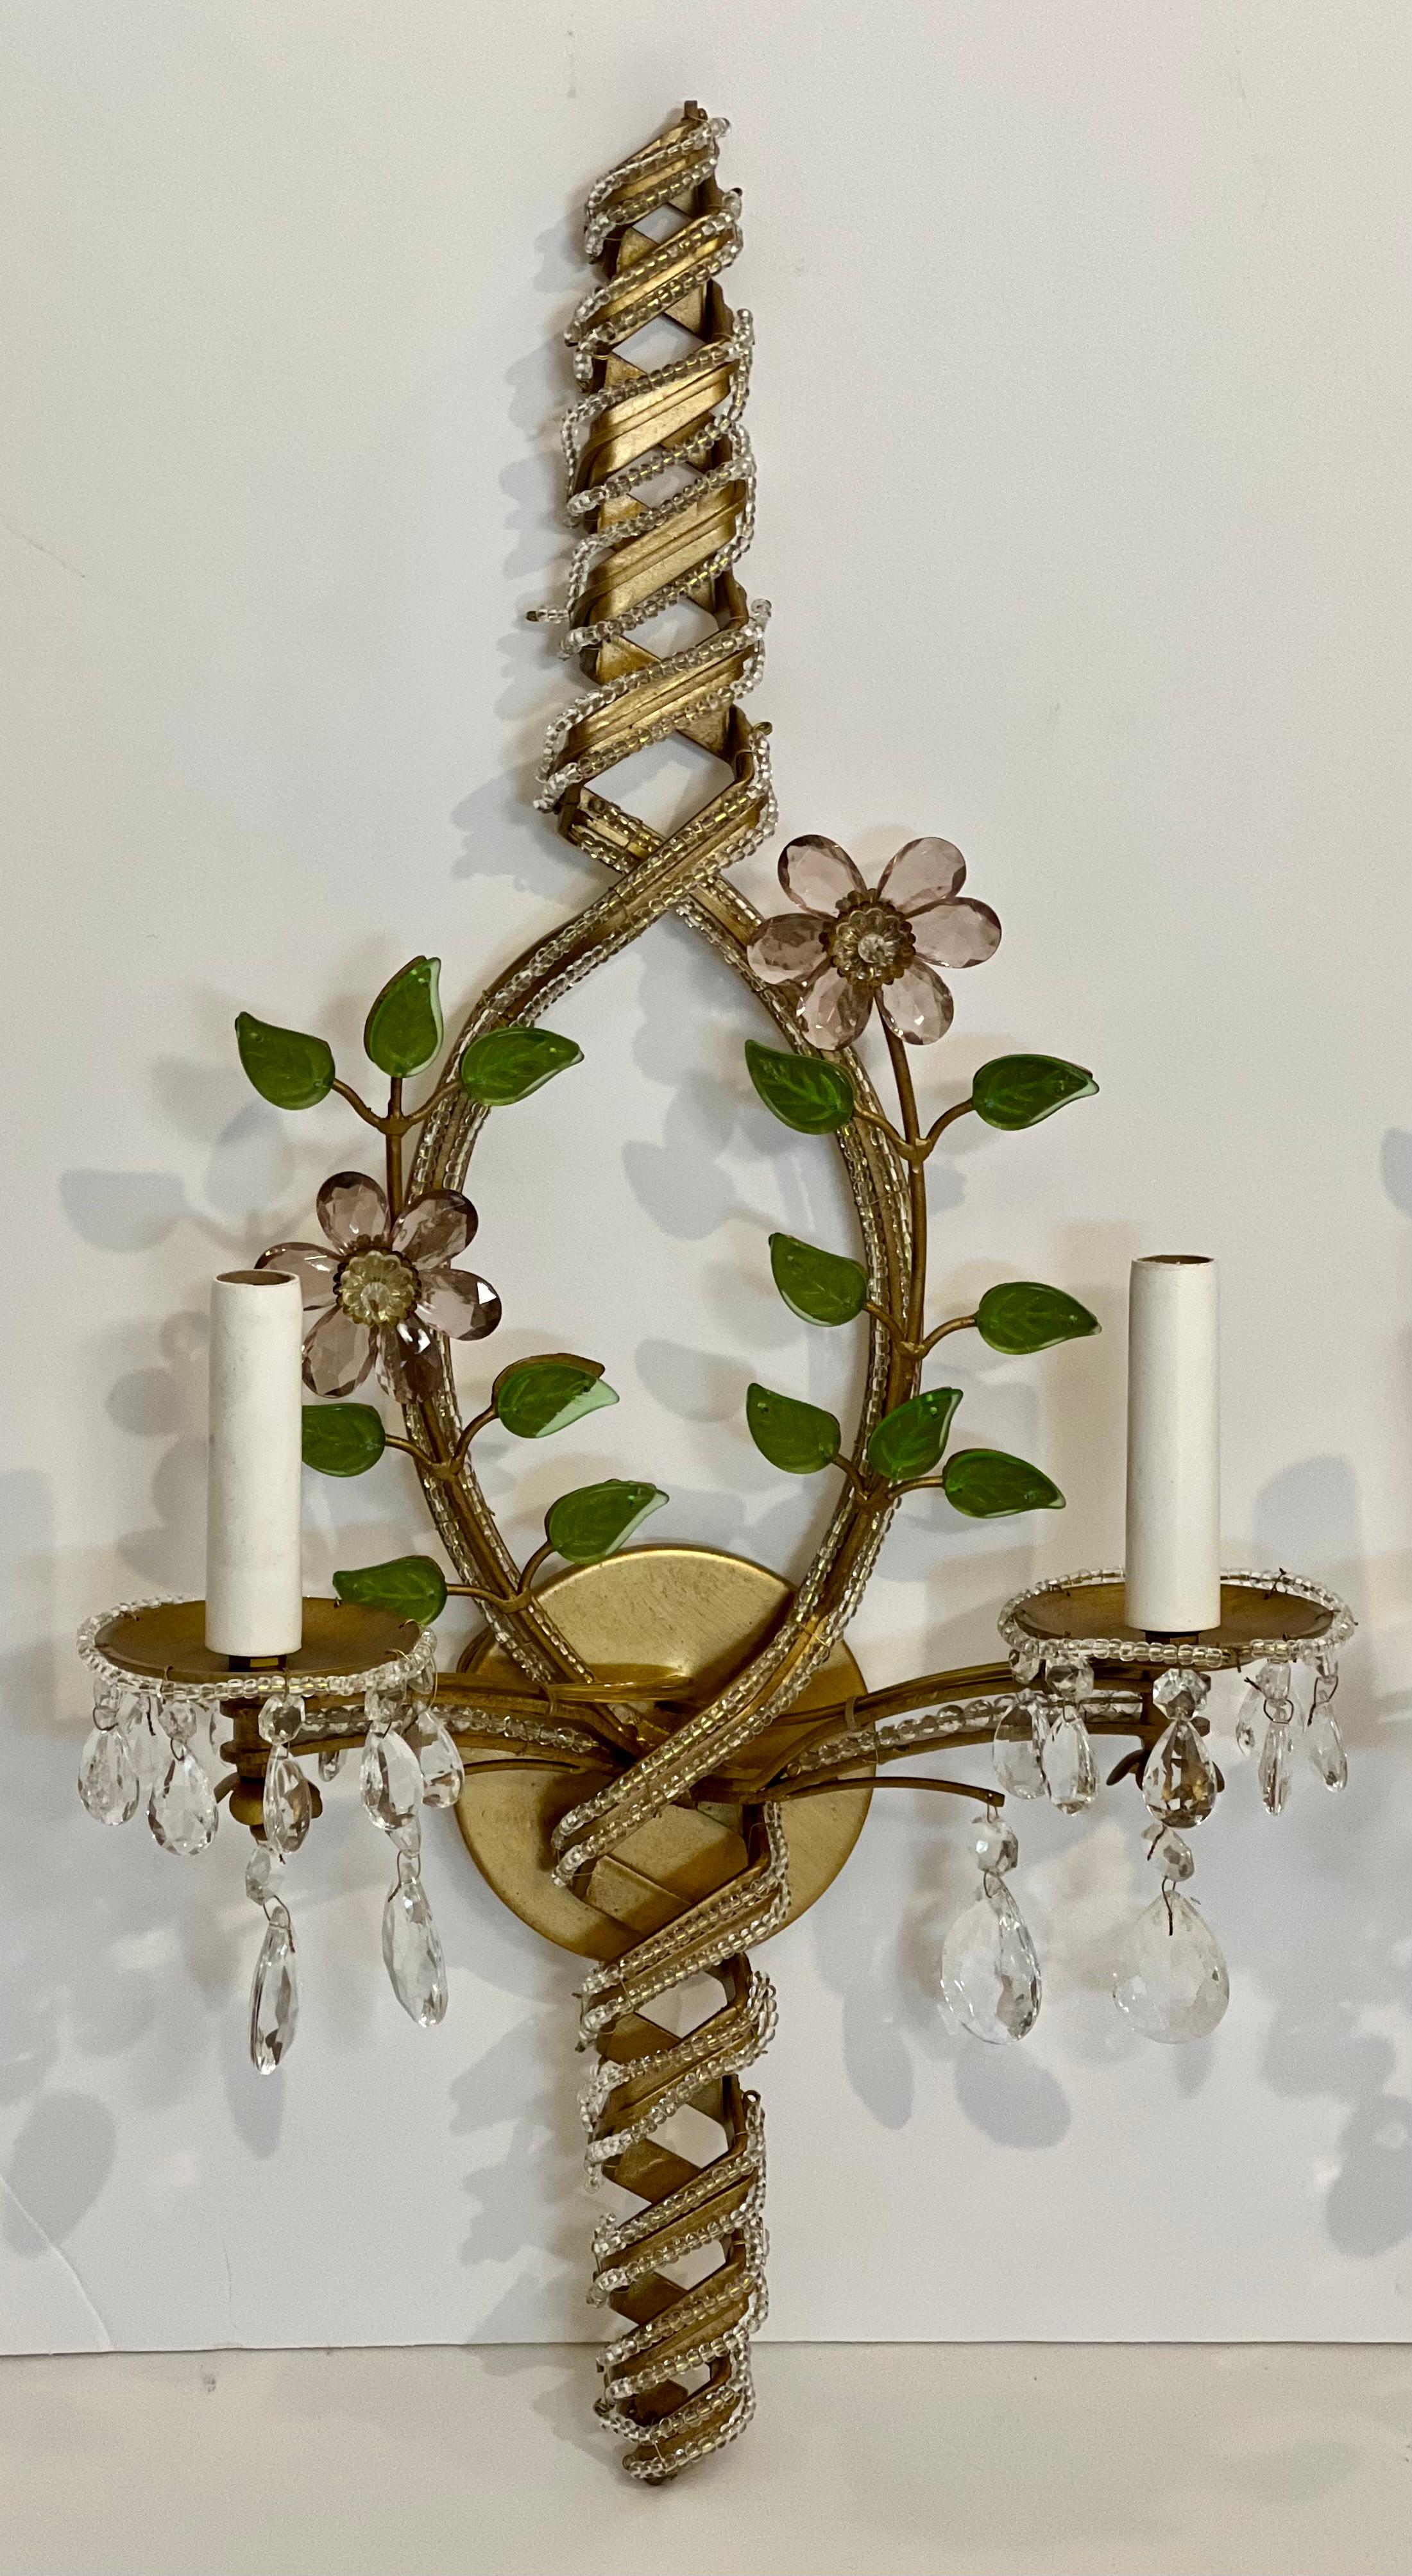 Elegant Italian iron sconces with intricate crystal flowers and beading.

These gorgeous sconces have lovely color with amethyst flowers and green leaves with faceted teardrop crystals and beading . Condition is new but made in early 2000s as they